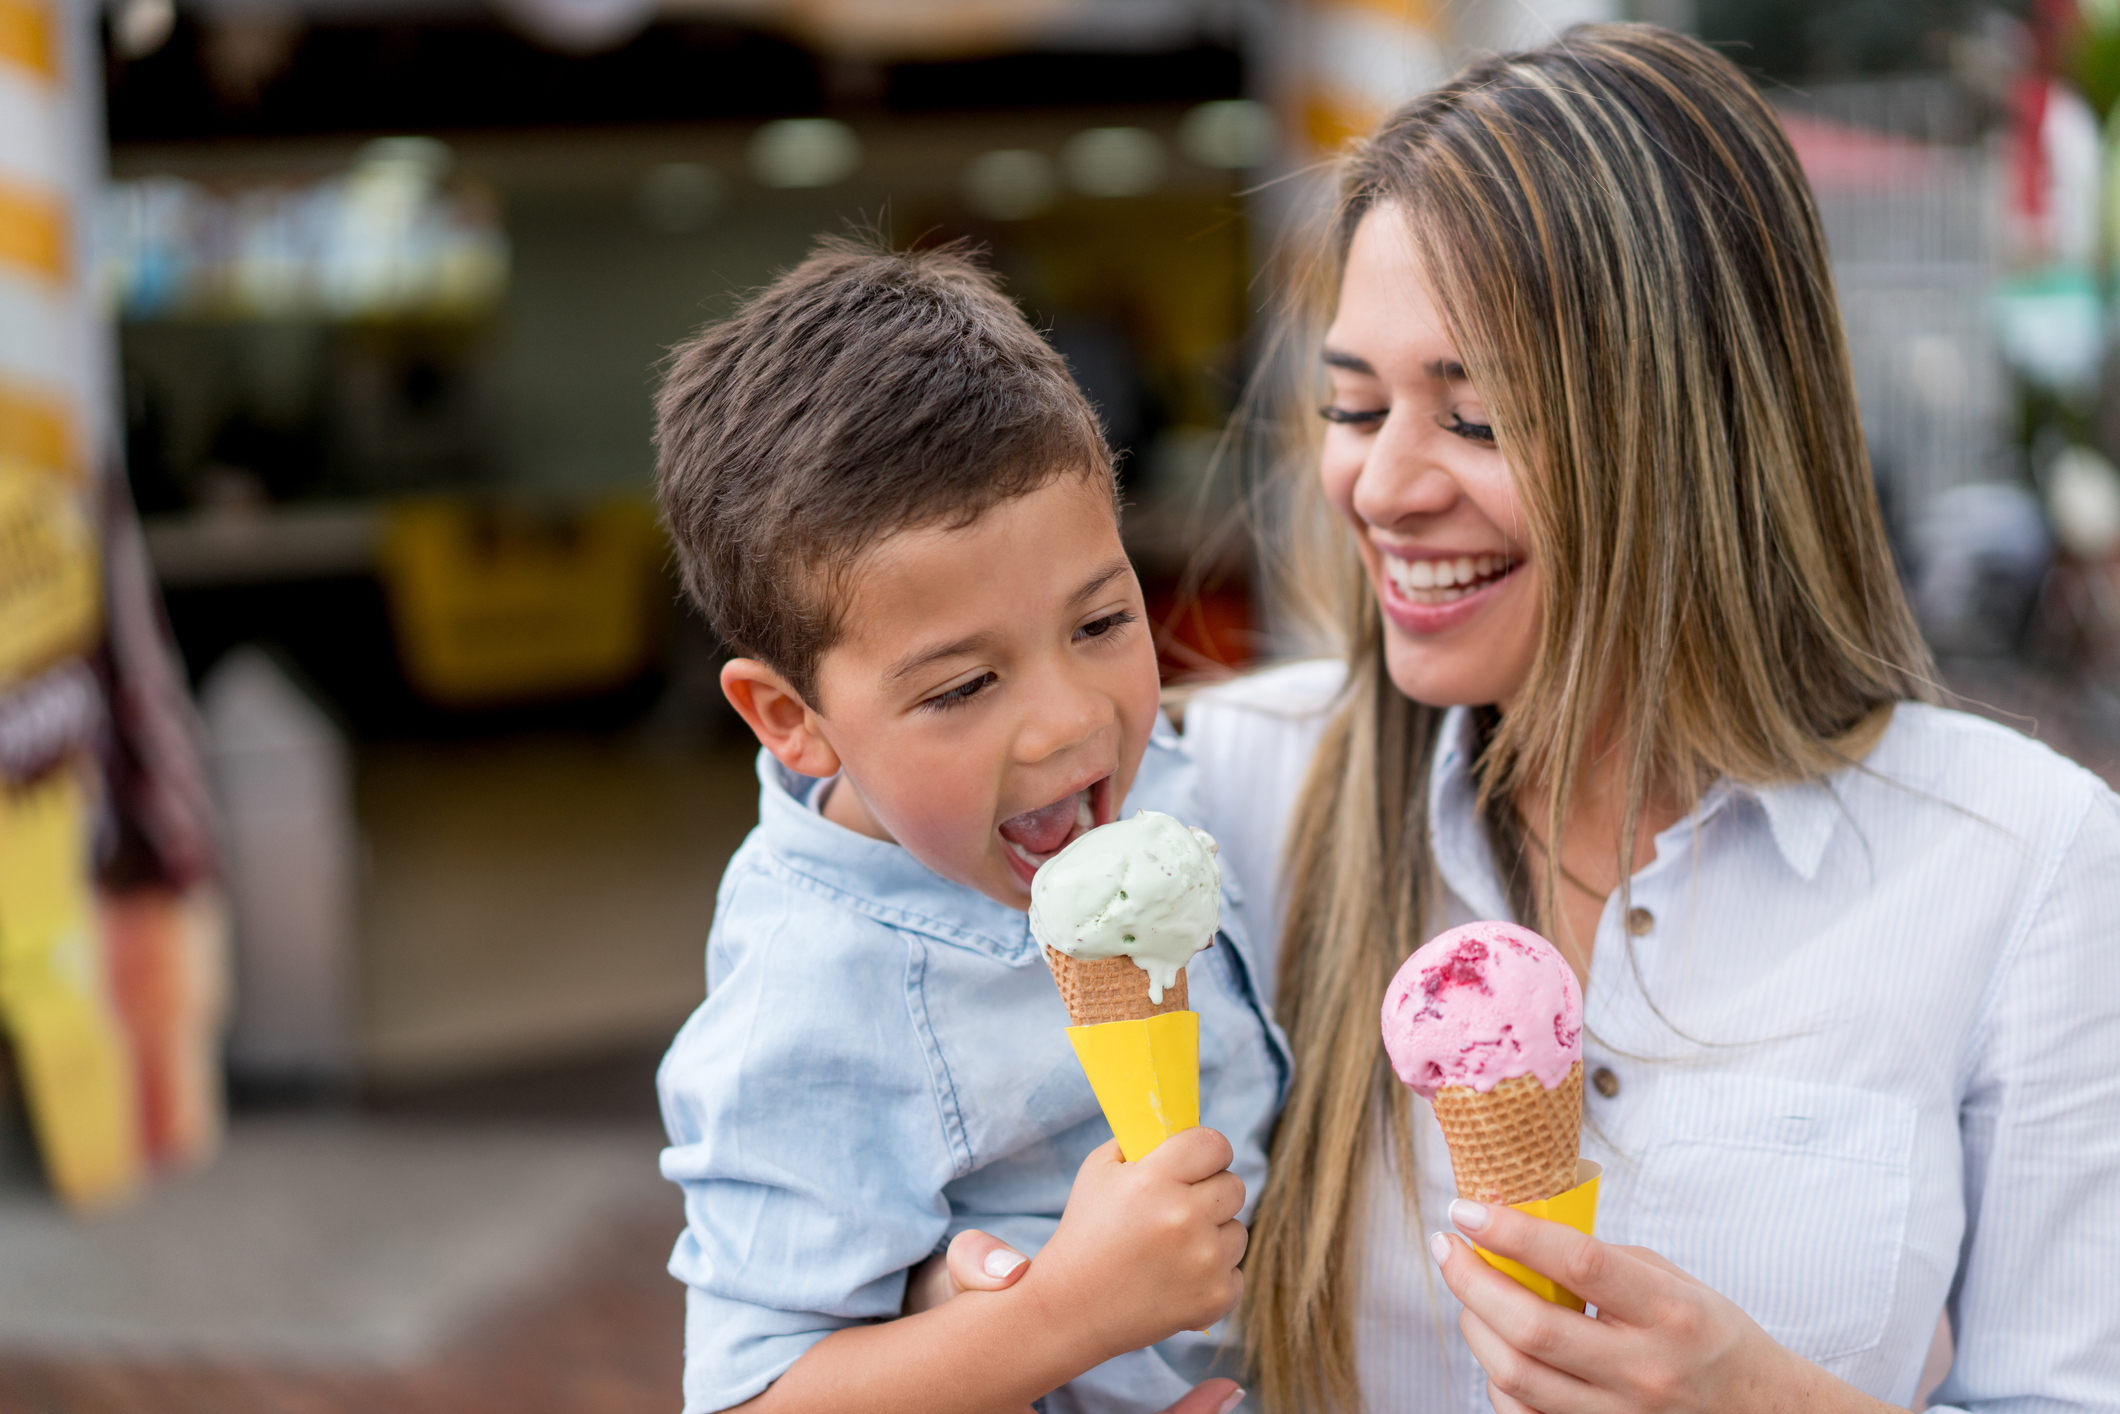 Mother and son eating an ice cream